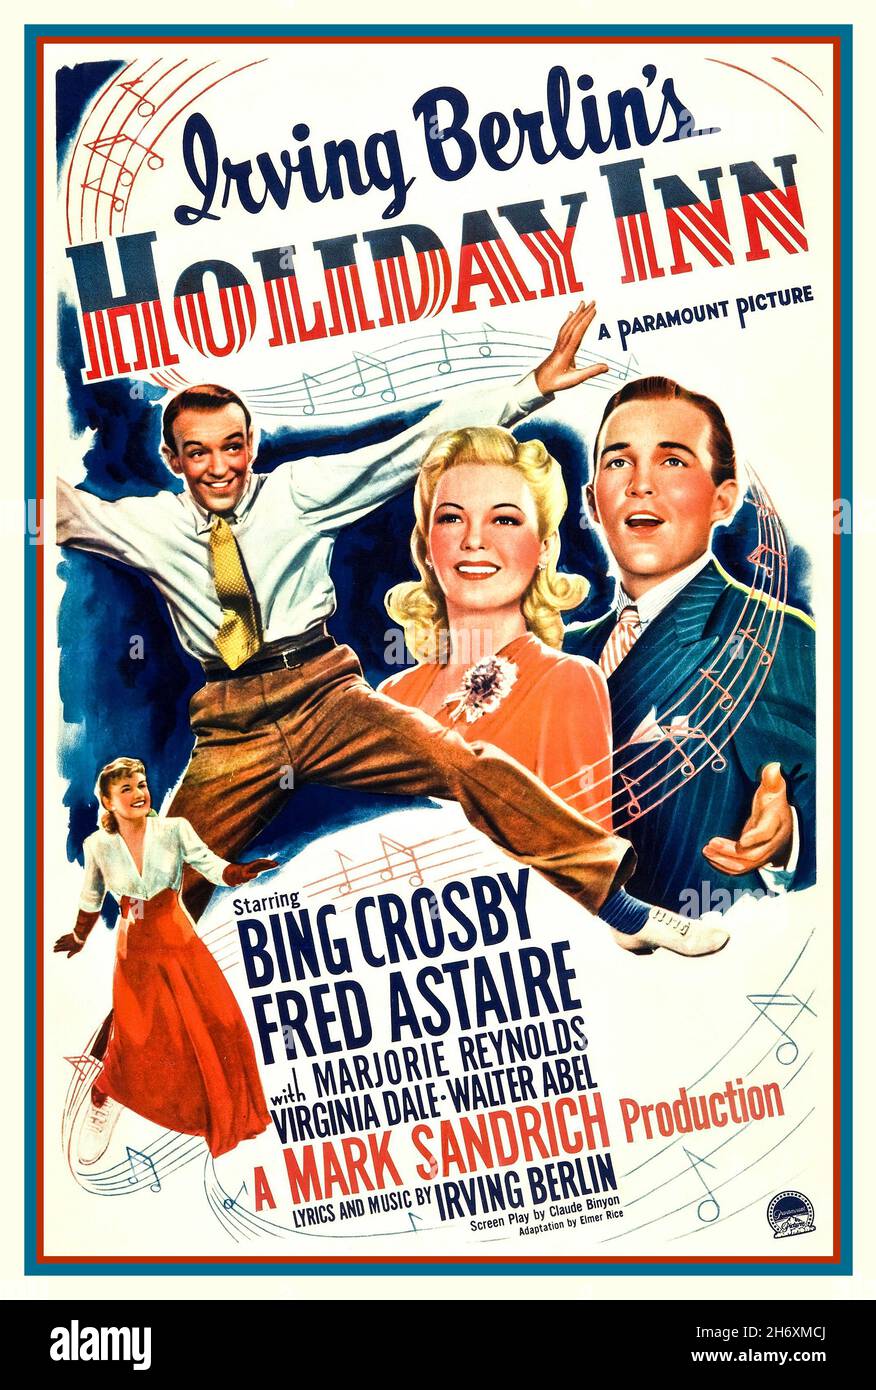 Vintage 1940s Movie Film Poster Holiday Inn a 1942 American musical film directed by Mark Sandrich and starring Bing Crosby and Fred Astaire, with Marjorie Reynolds, Virginia Dale, and Walter Abel. With music by Irving Berlin, the composer wrote twelve songs specifically for the film, the best known being 'White Christmas'. The film features a complete reuse of the song 'Easter Parade', written by Berlin for the 1933 Broadway revue As Thousands Cheer. The film's choreography was by Danny Dare. The film received a 1943 Academy Award for Best Original Song (Irving Berlin for 'White Christmas'), Stock Photo